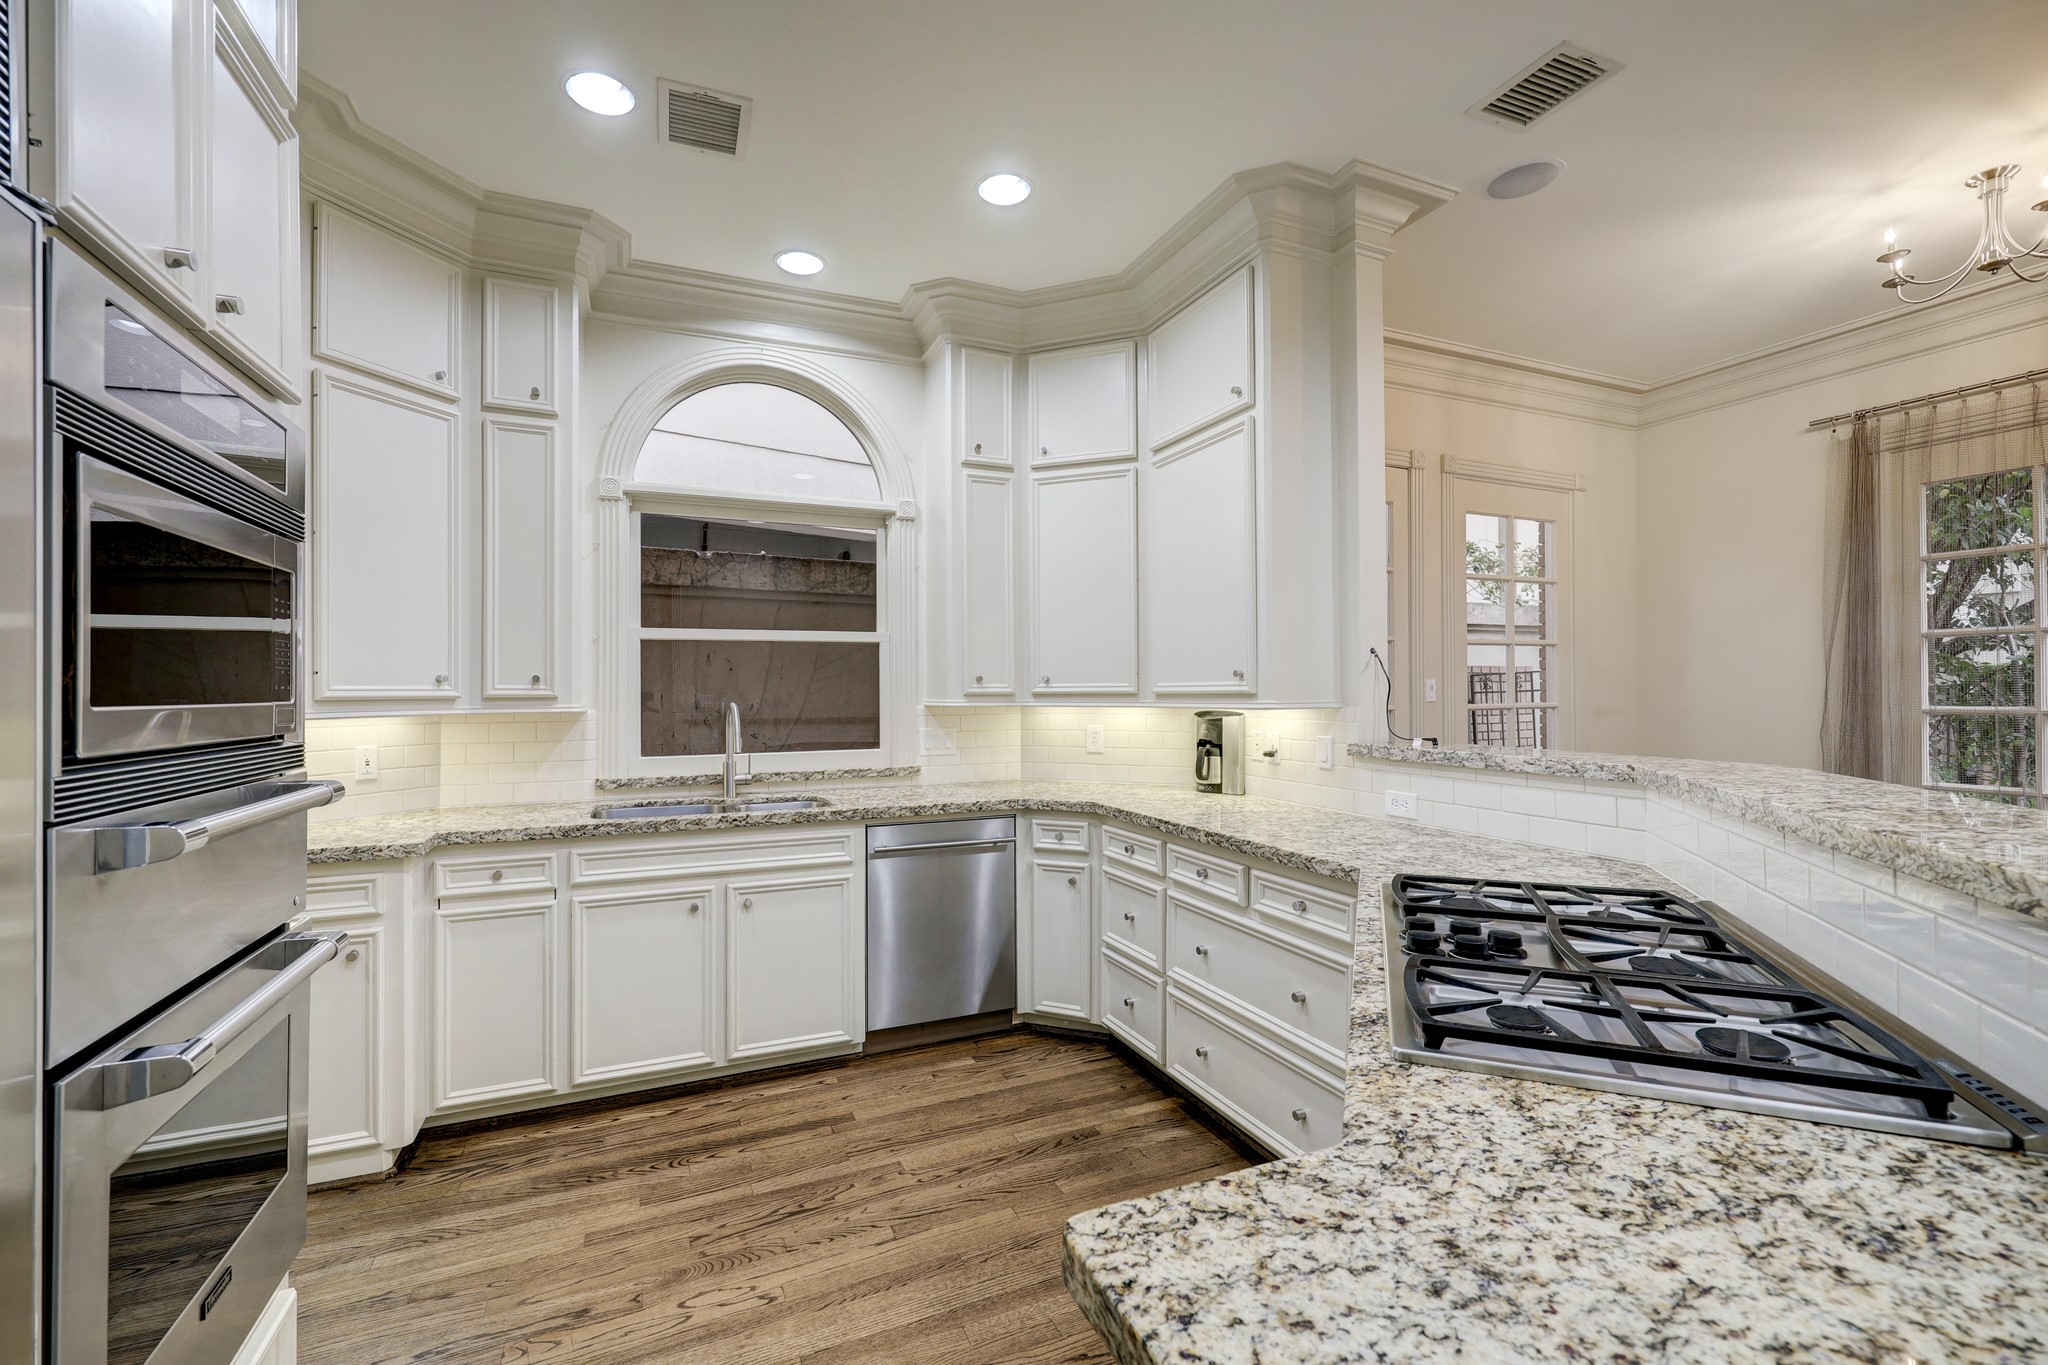 the large kitchen offers double ovens and a gas range and bar seating.